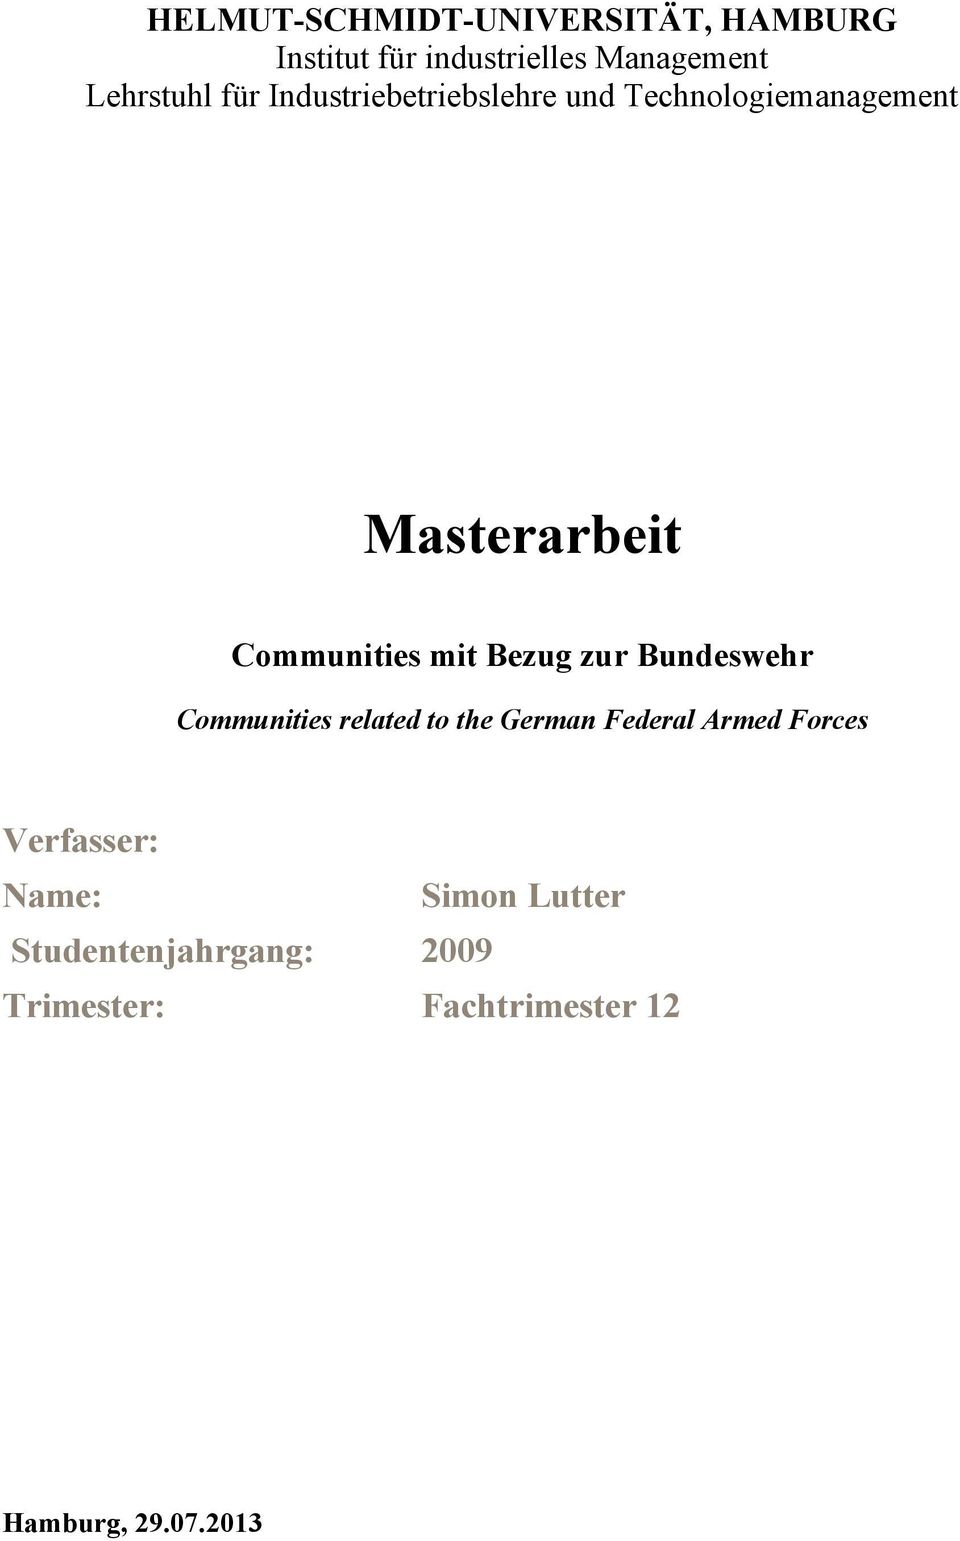 Bezug zur Bundeswehr Communities related to the German Federal Armed Forces